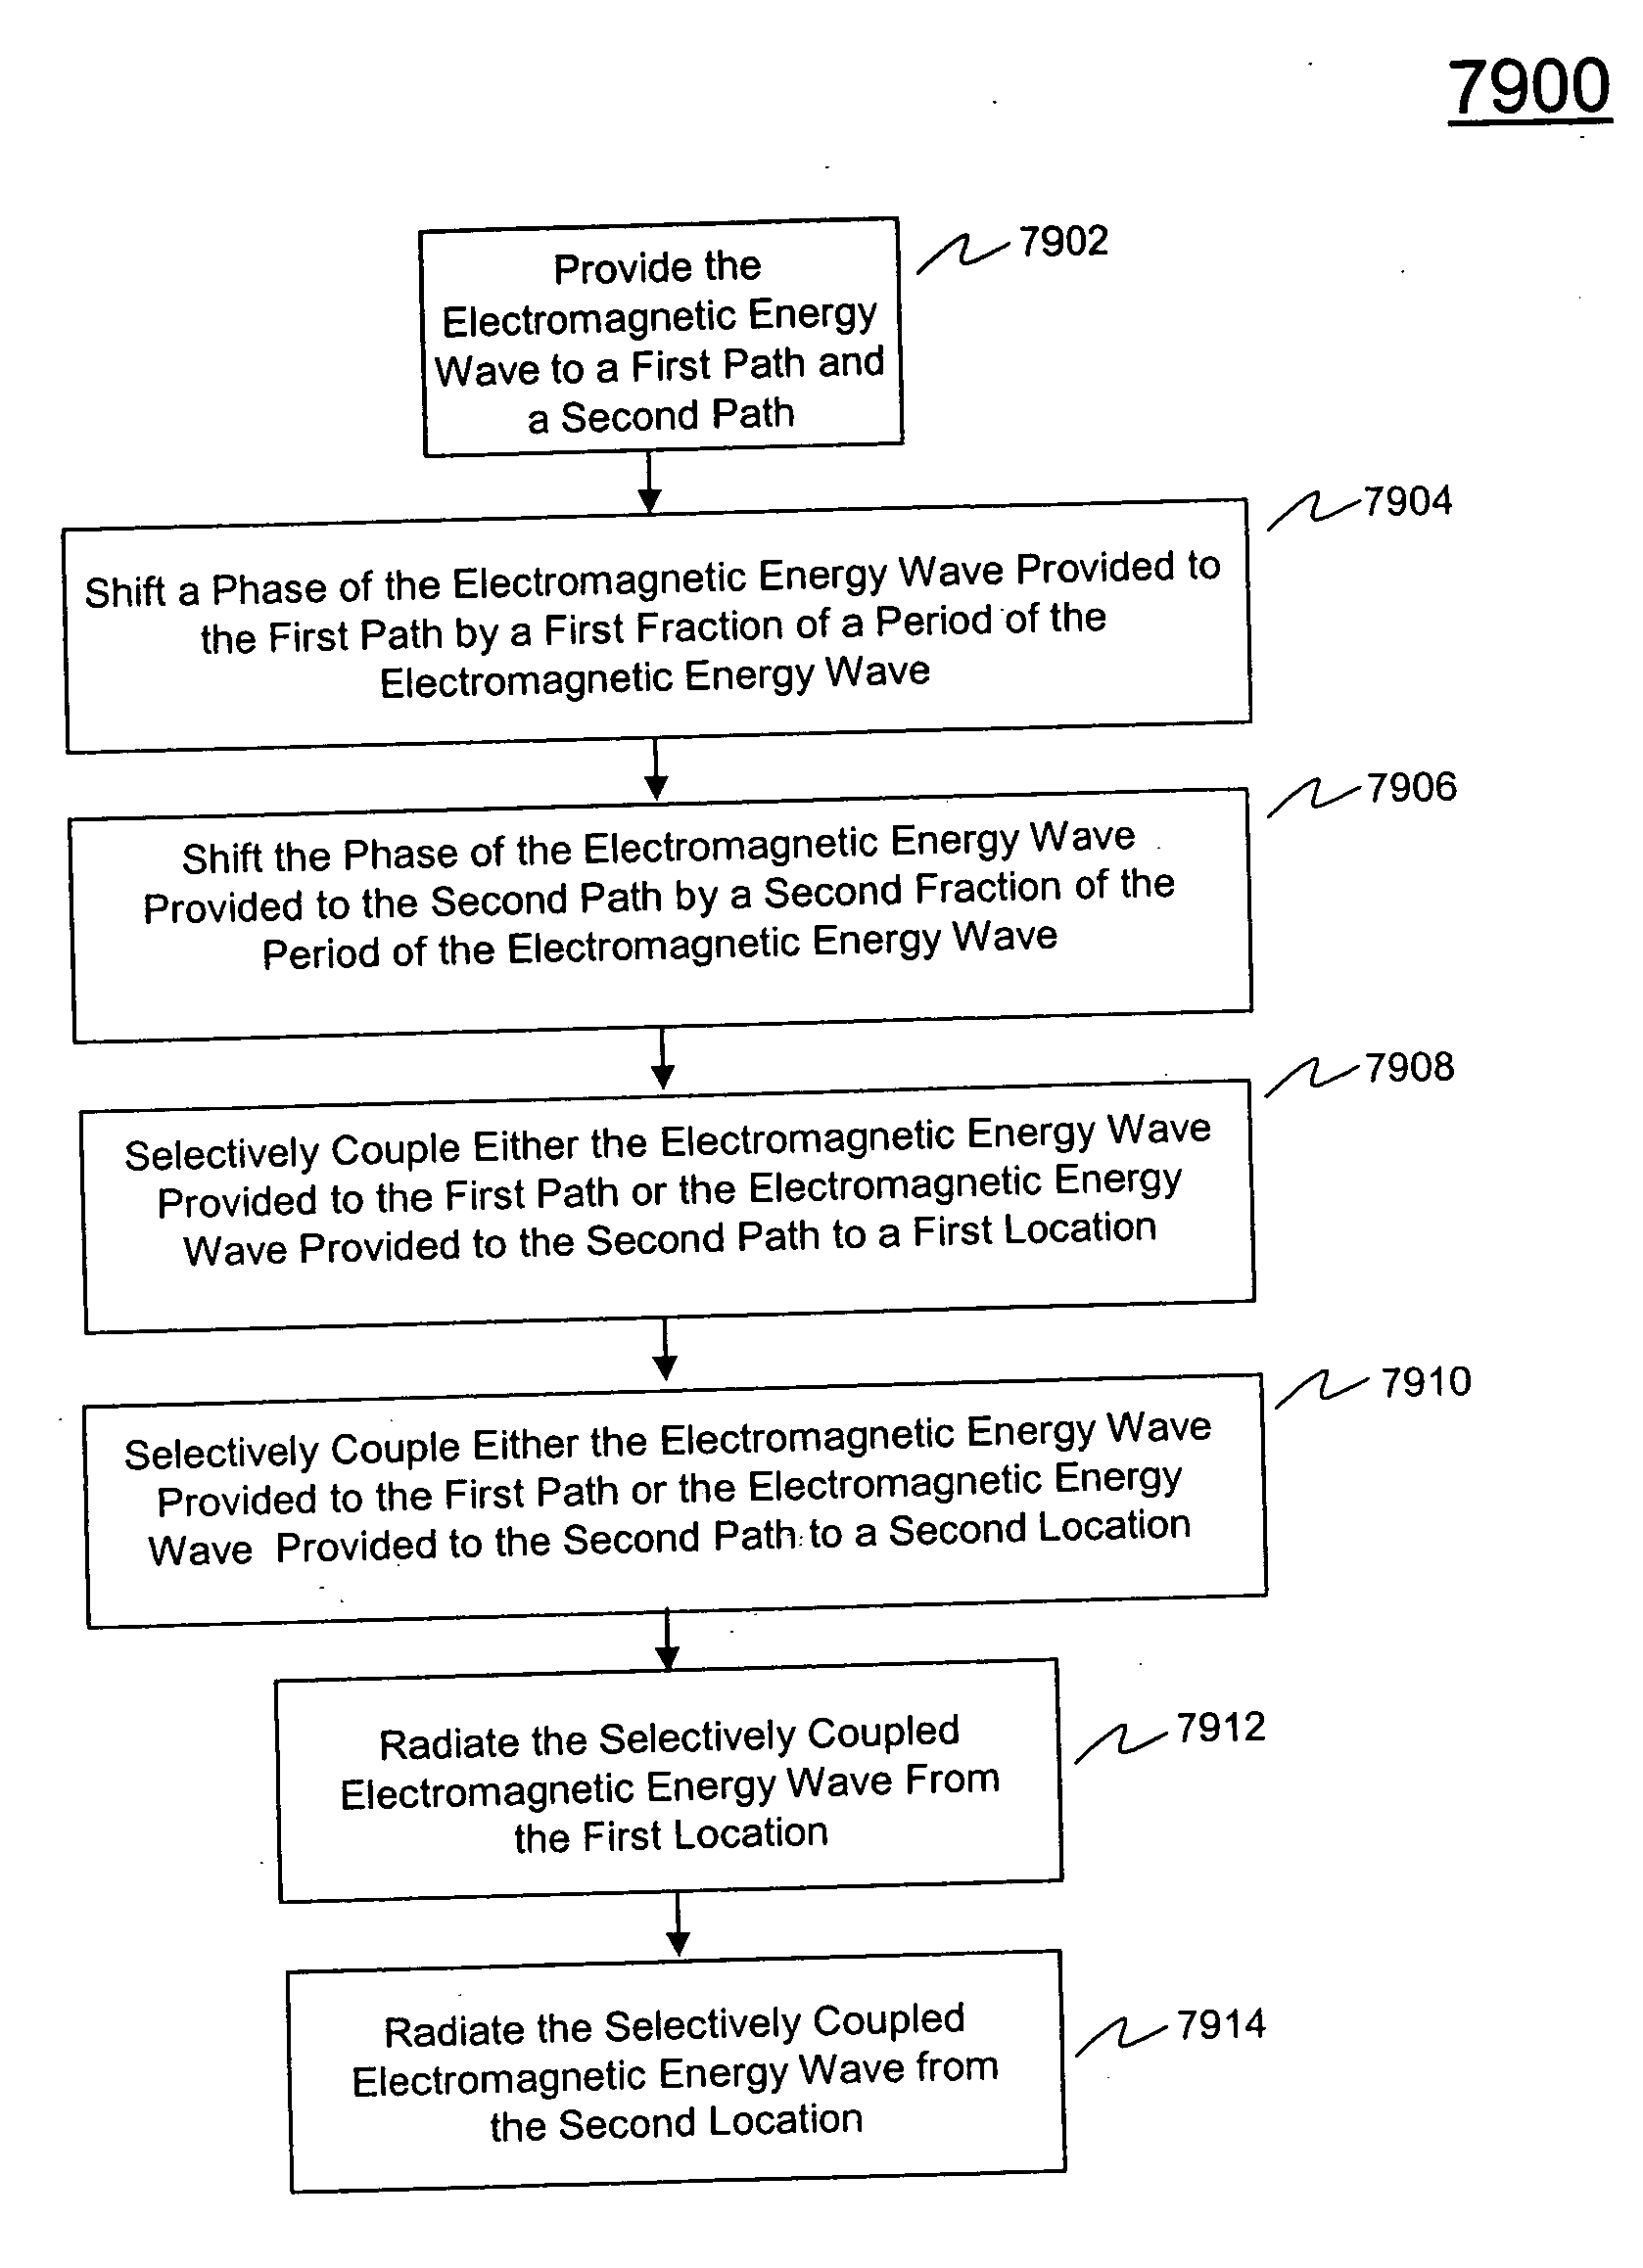 Phased array systems and methods